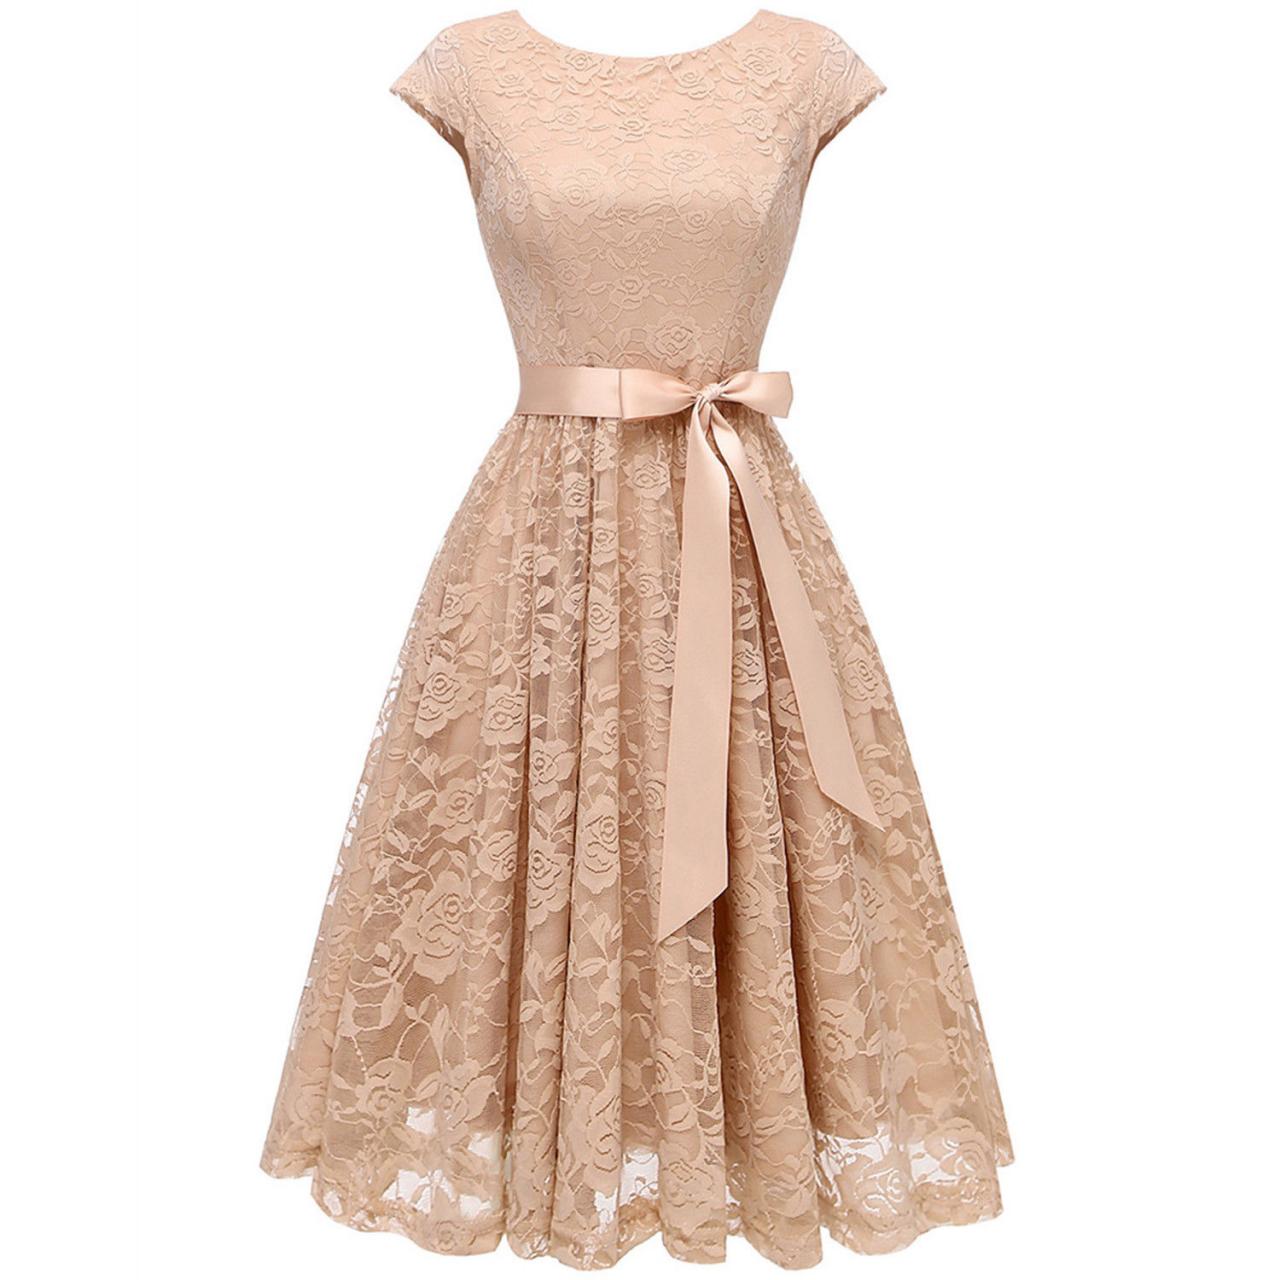 Cap Sleeves Lovely Short Lace Homecoming Dresses Scoop Neck Women Party Dress